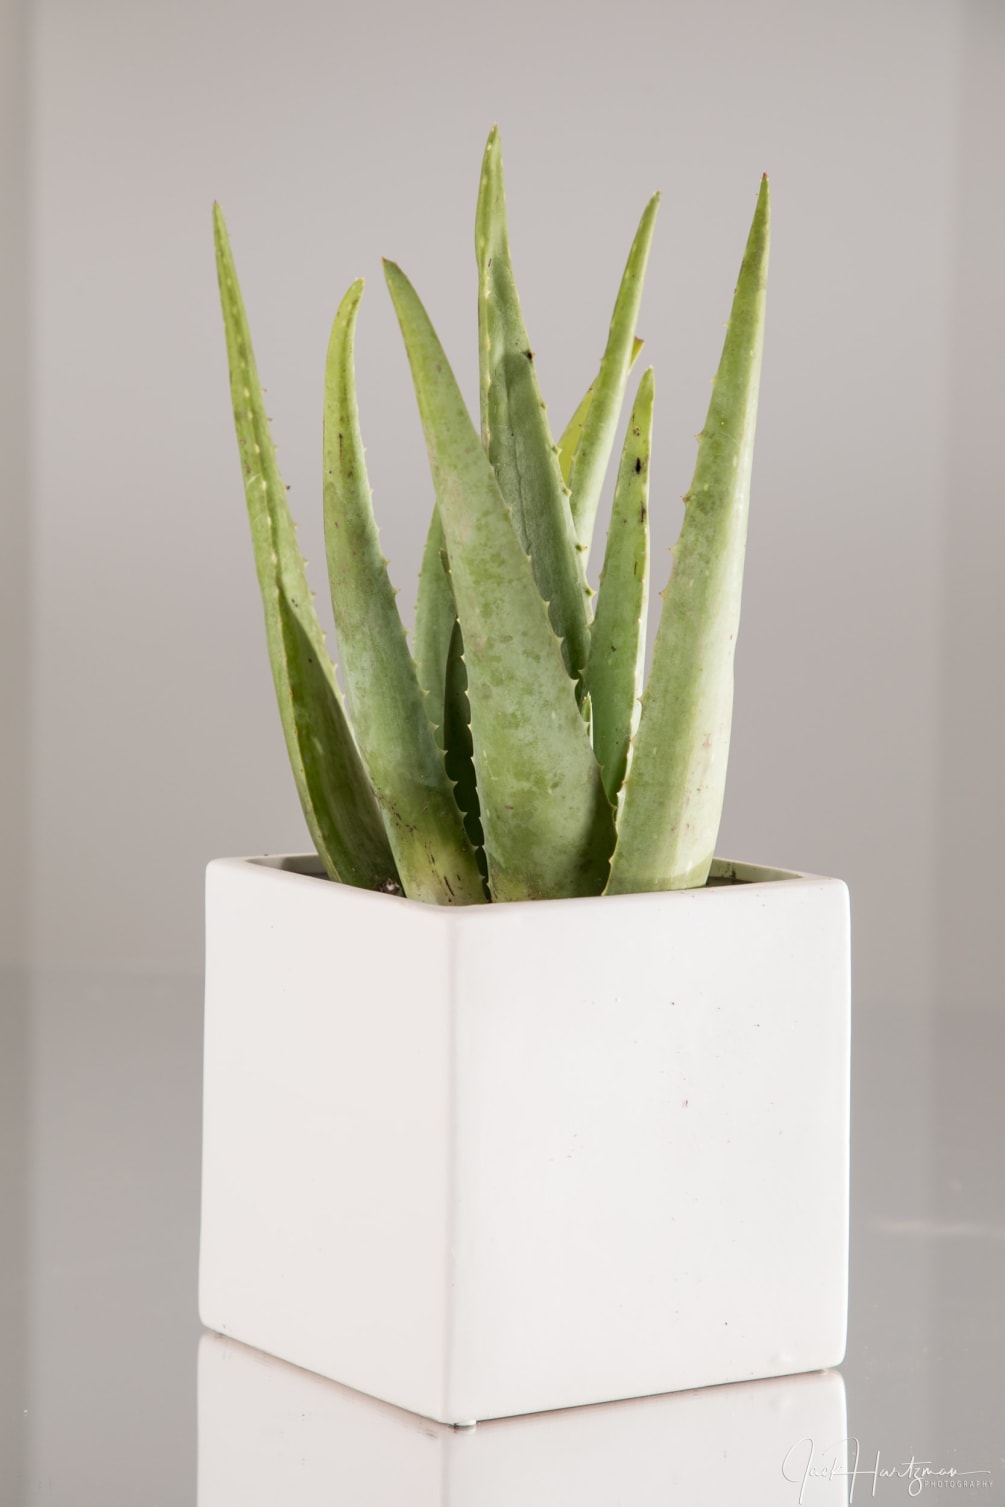 Aloe vera is a succulent plant with many medicinal and healing qualities